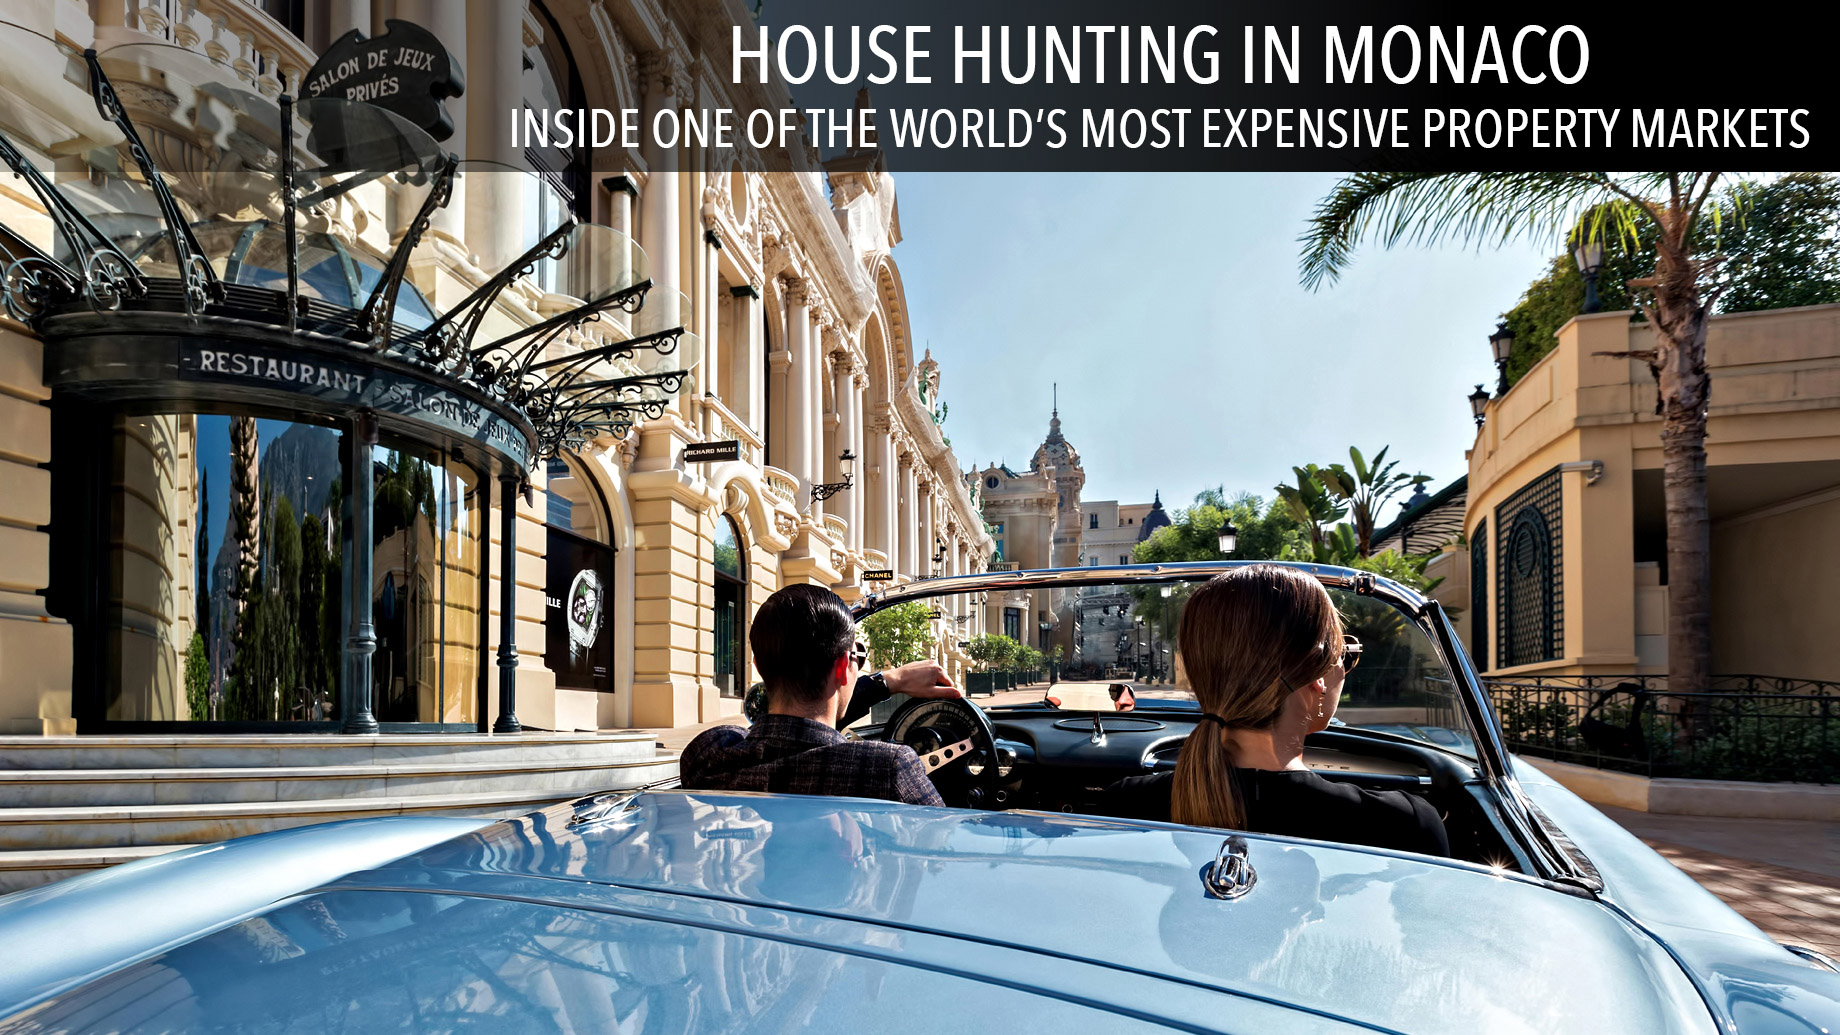 House Hunting in Monaco – Inside One of the World’s Most Expensive Property Markets